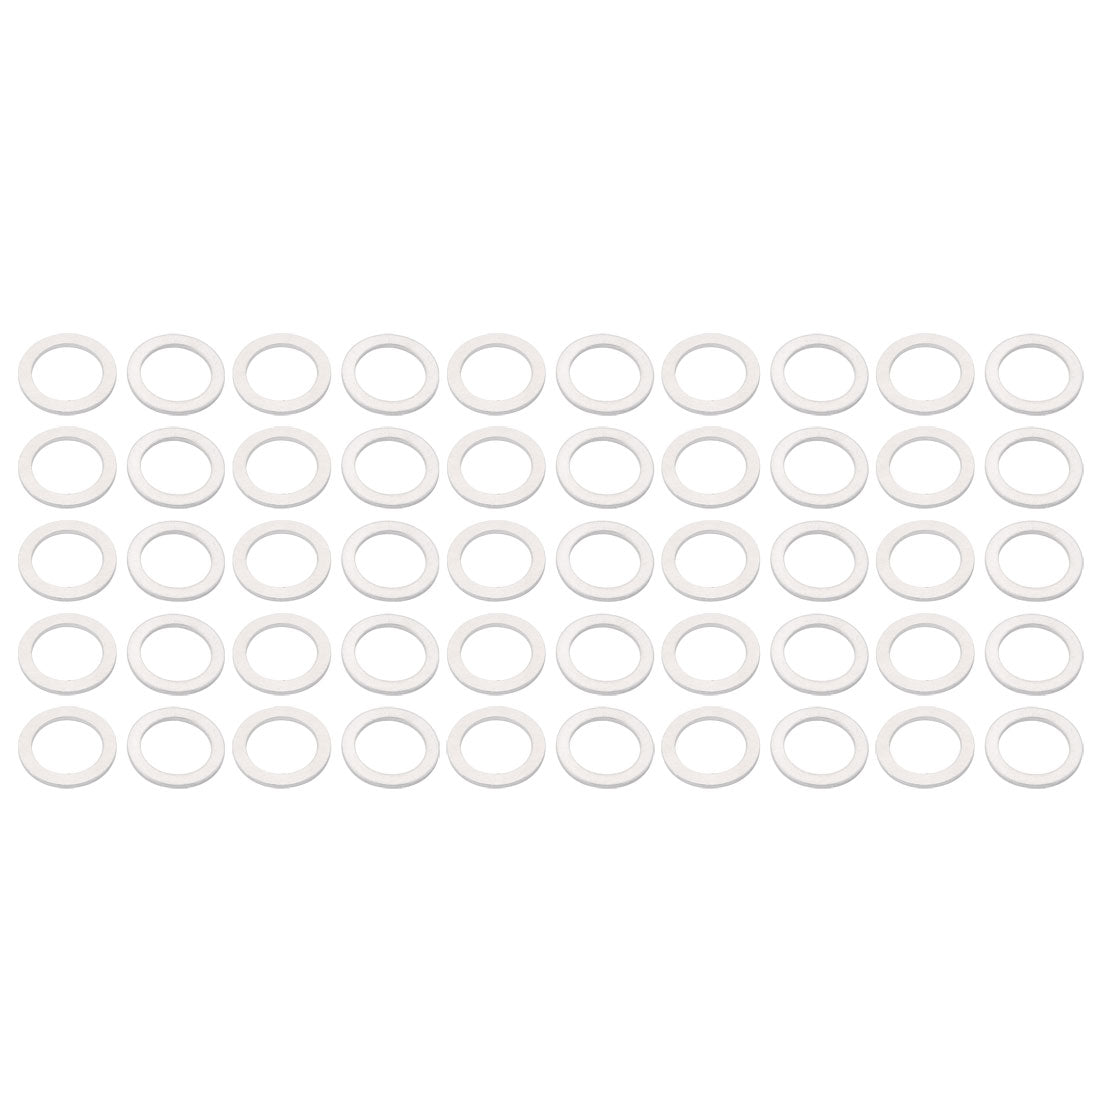 uxcell Uxcell 14mmx20mmx1.2mm Motorcycle Hardware Drain Plug Crush Aluminum Washer Seal 50pcs